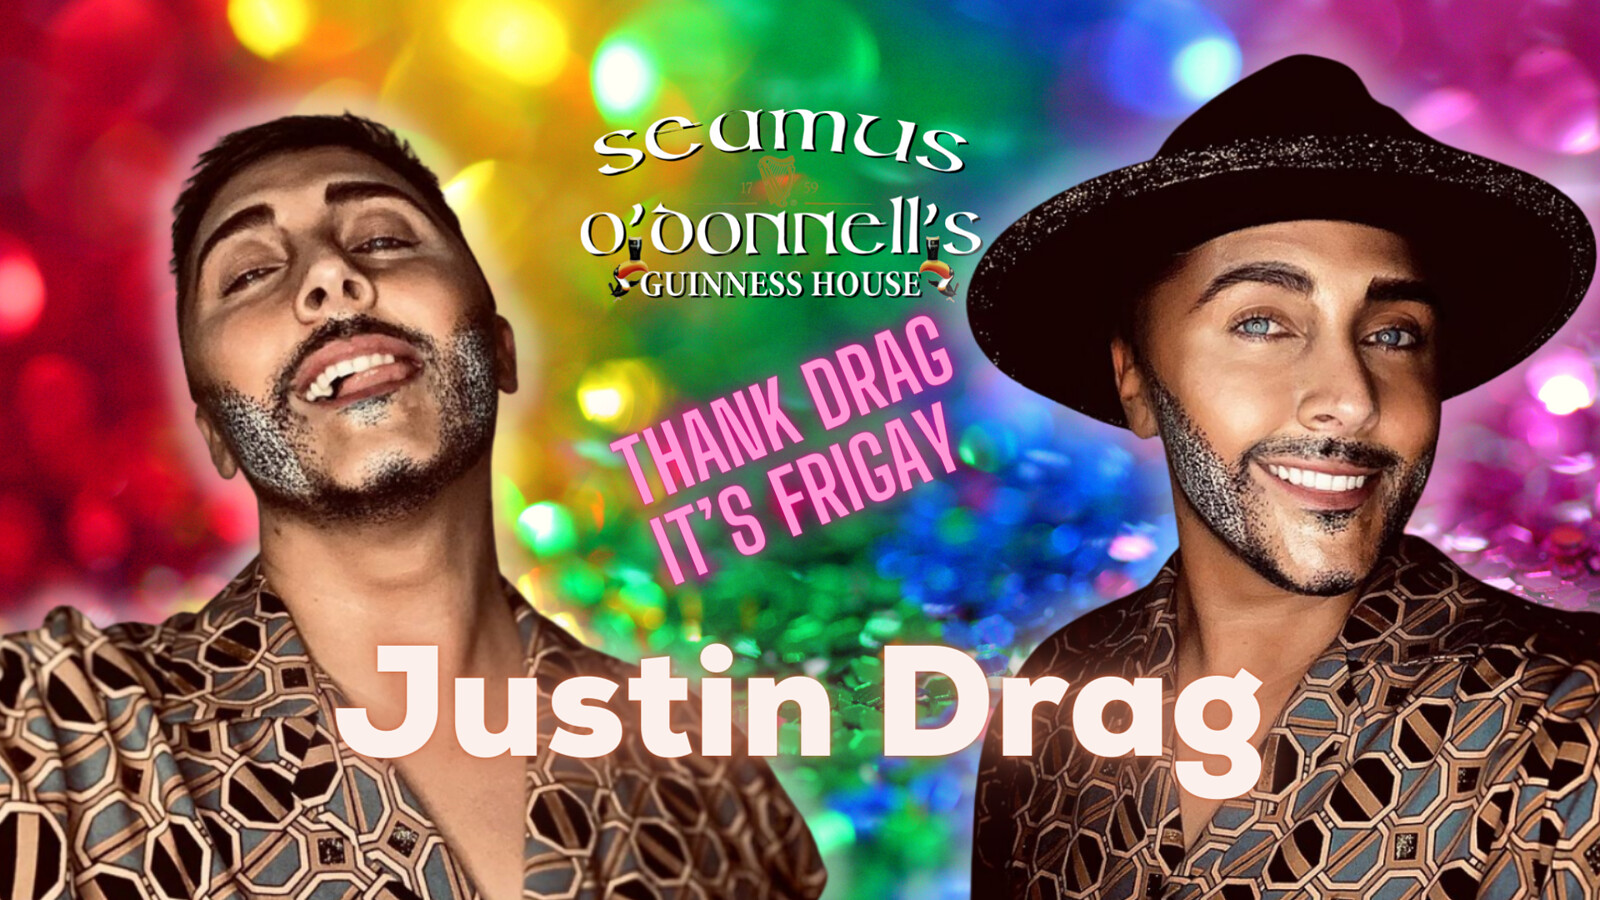 Thank Drag Its FriGay with Justin Drag at Seamus O'Donnell's